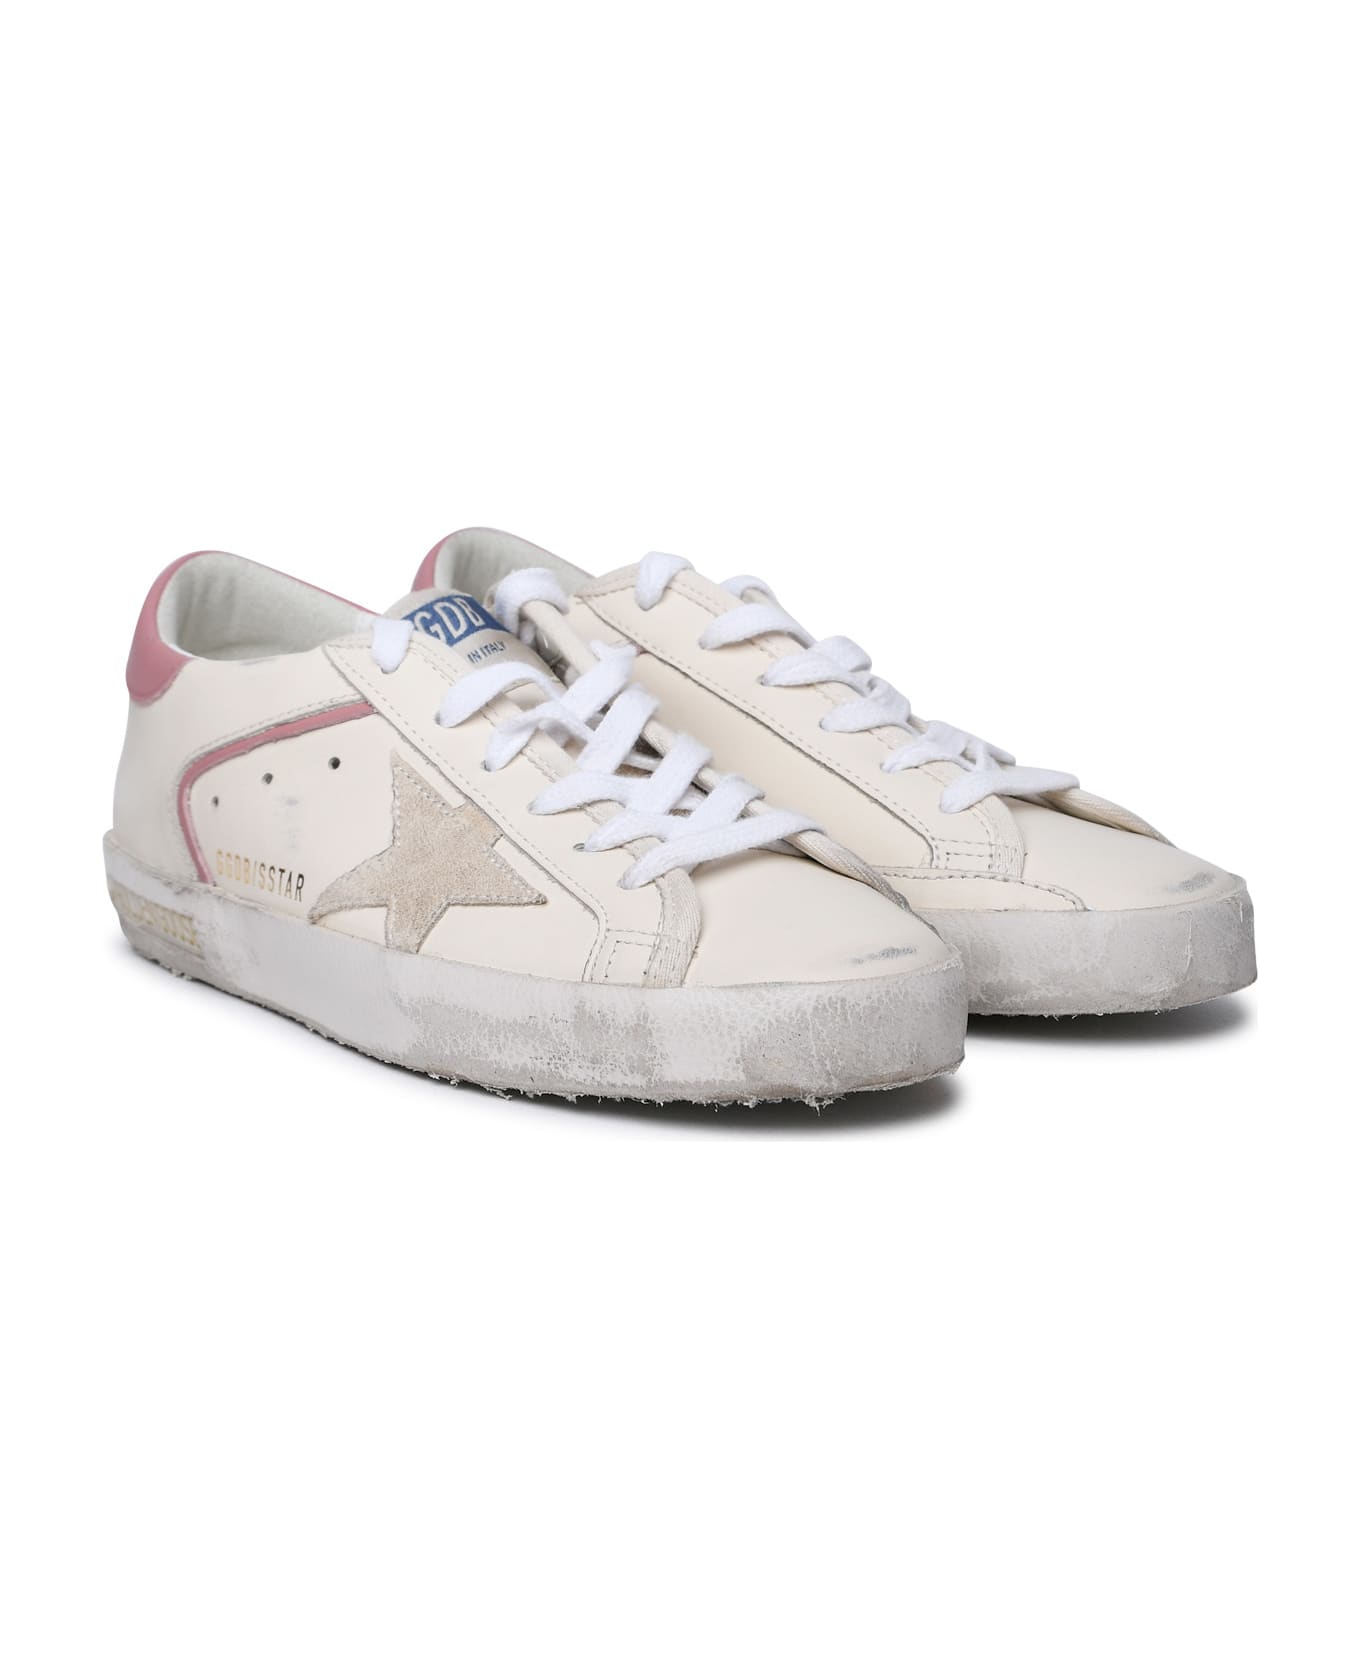 Golden Goose Super-star Leather Upper Suede Star Leather Heel Sneakers - Cream Seedpearl Ash Rose